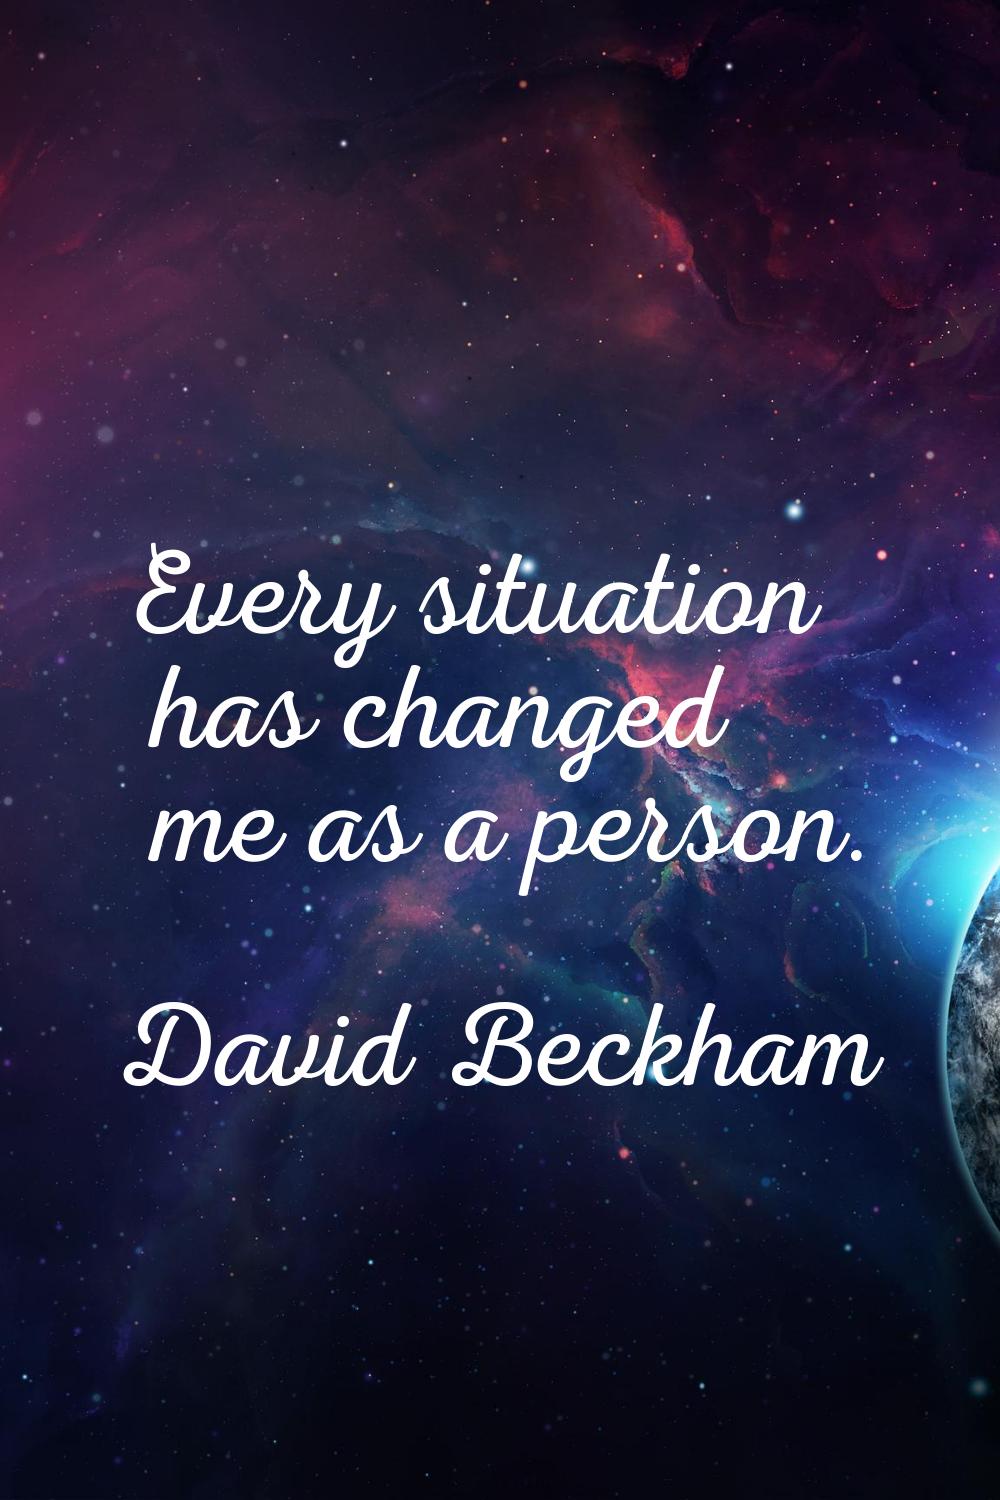 Every situation has changed me as a person.